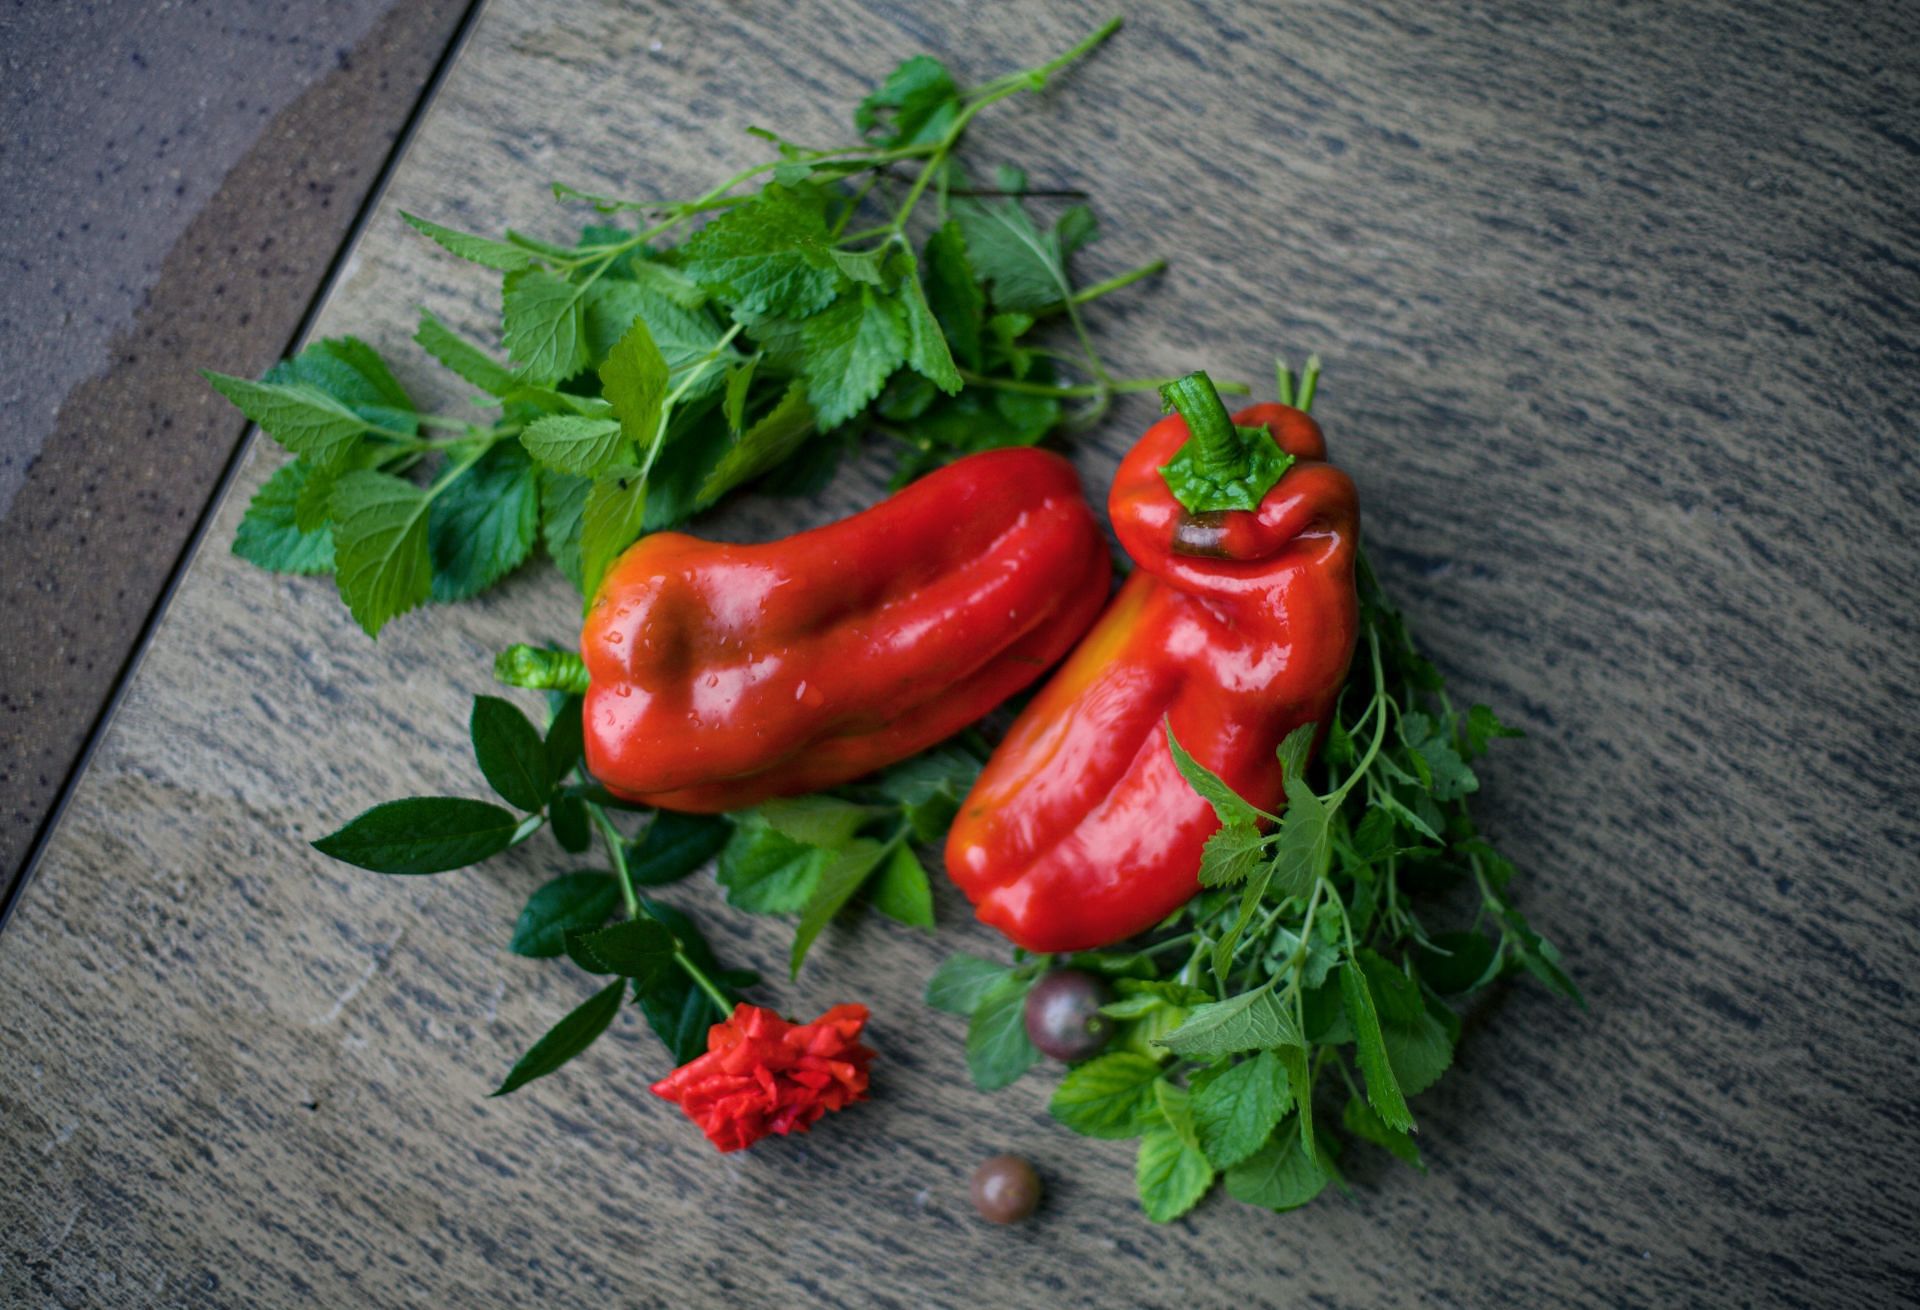 Chipotle peppers are popular in mexican cuisine (Image via Unsplash/Tamara Malaniy)